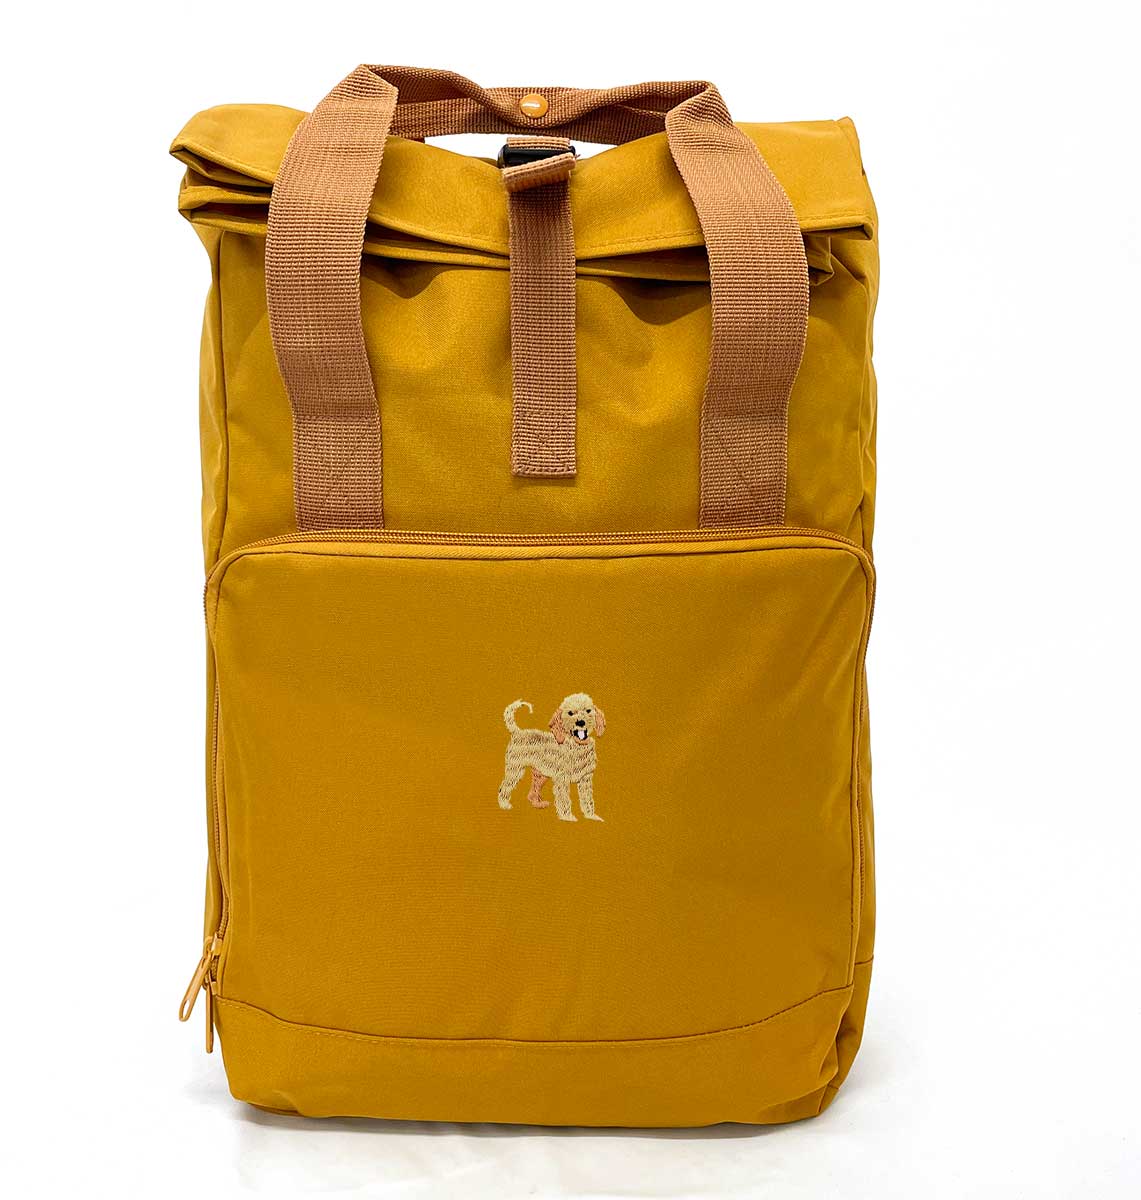 Labradoodle Roll-top Laptop Recycled Backpack - Blue Panda